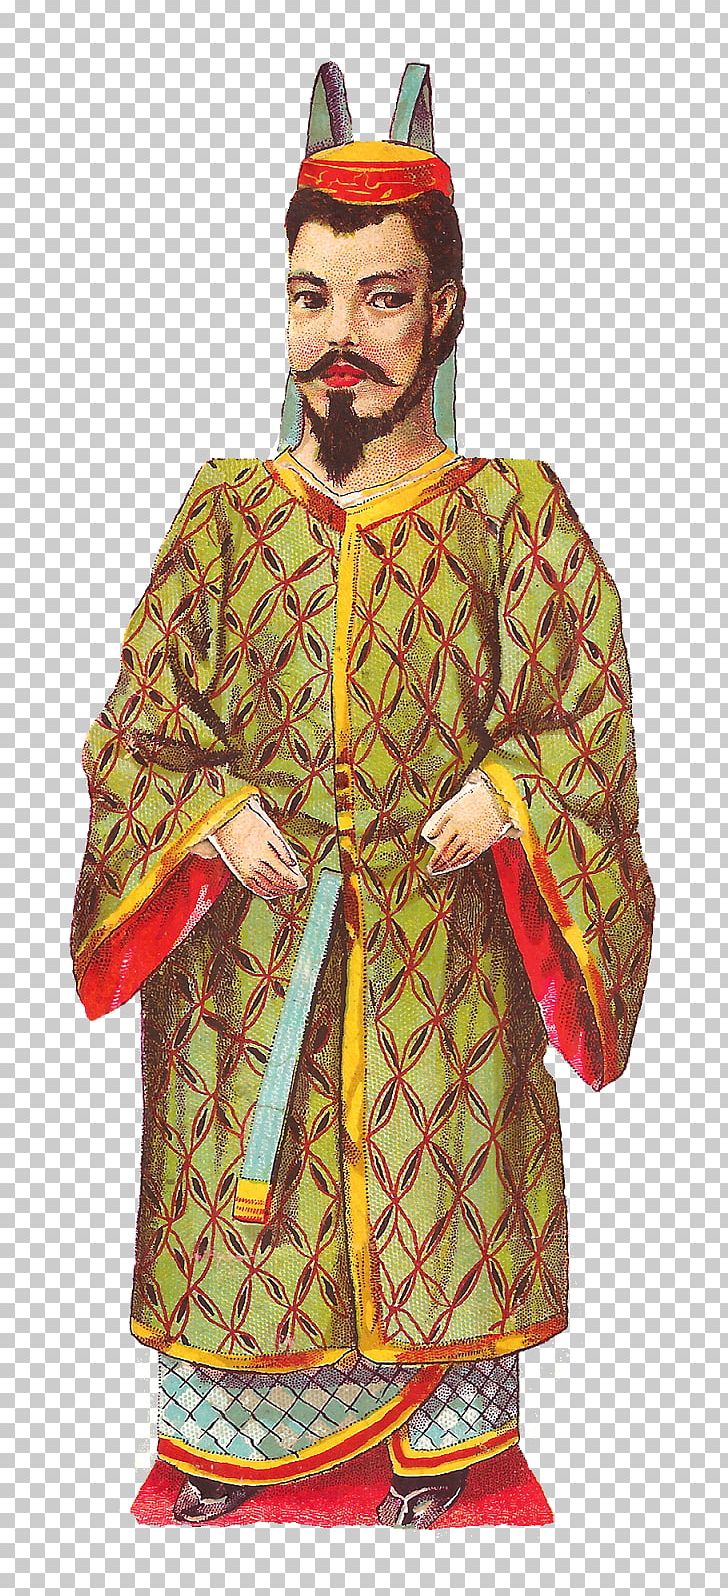 Emperor Of Japan Robe PNG, Clipart, Clip, Computer Icons, Costume, Costume Design, Dress Free PNG Download